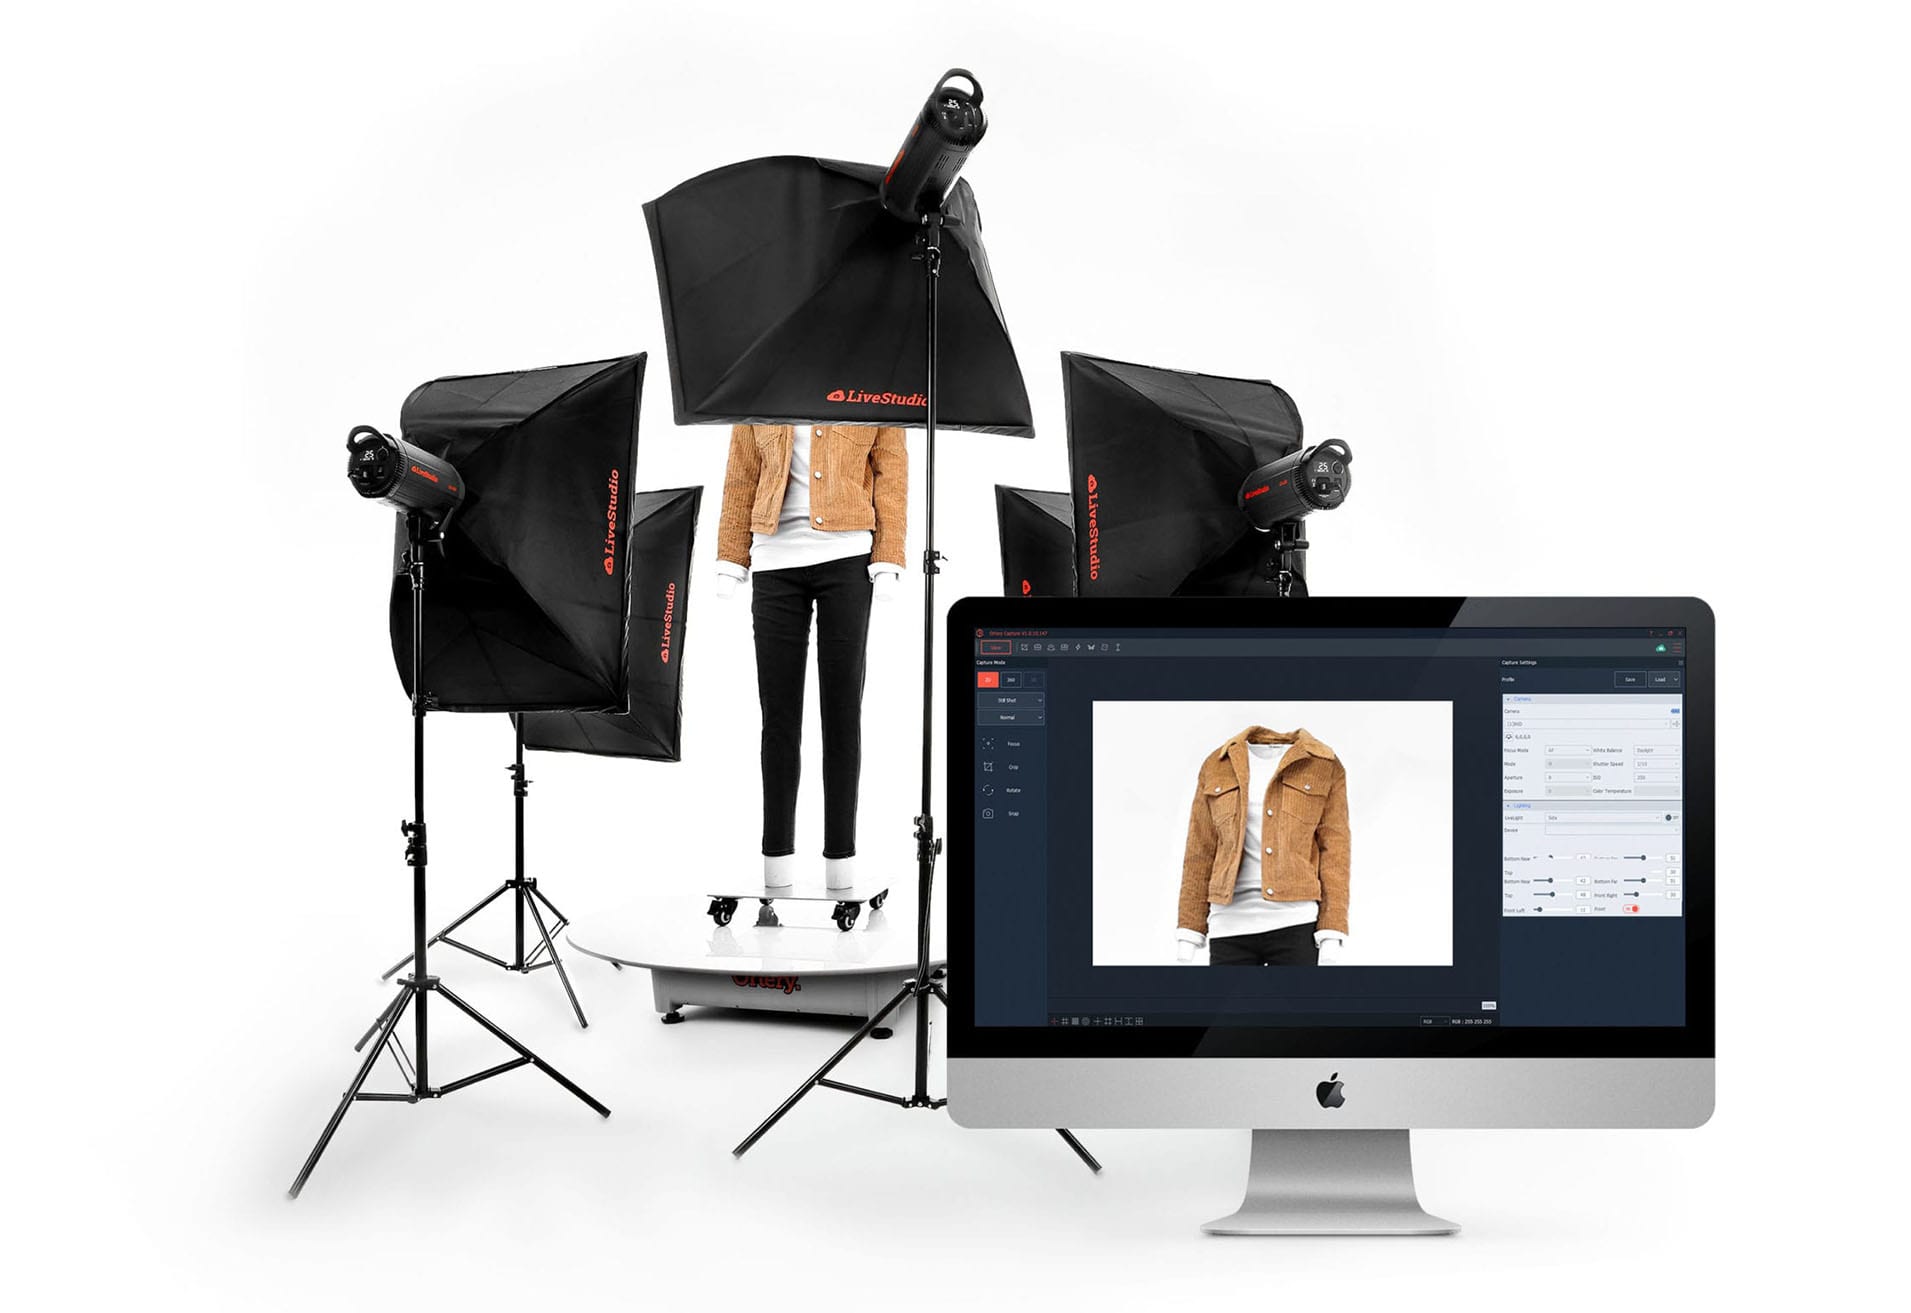 Ortery LiveStudio LED Photography Studio Light Kits controlled by software.